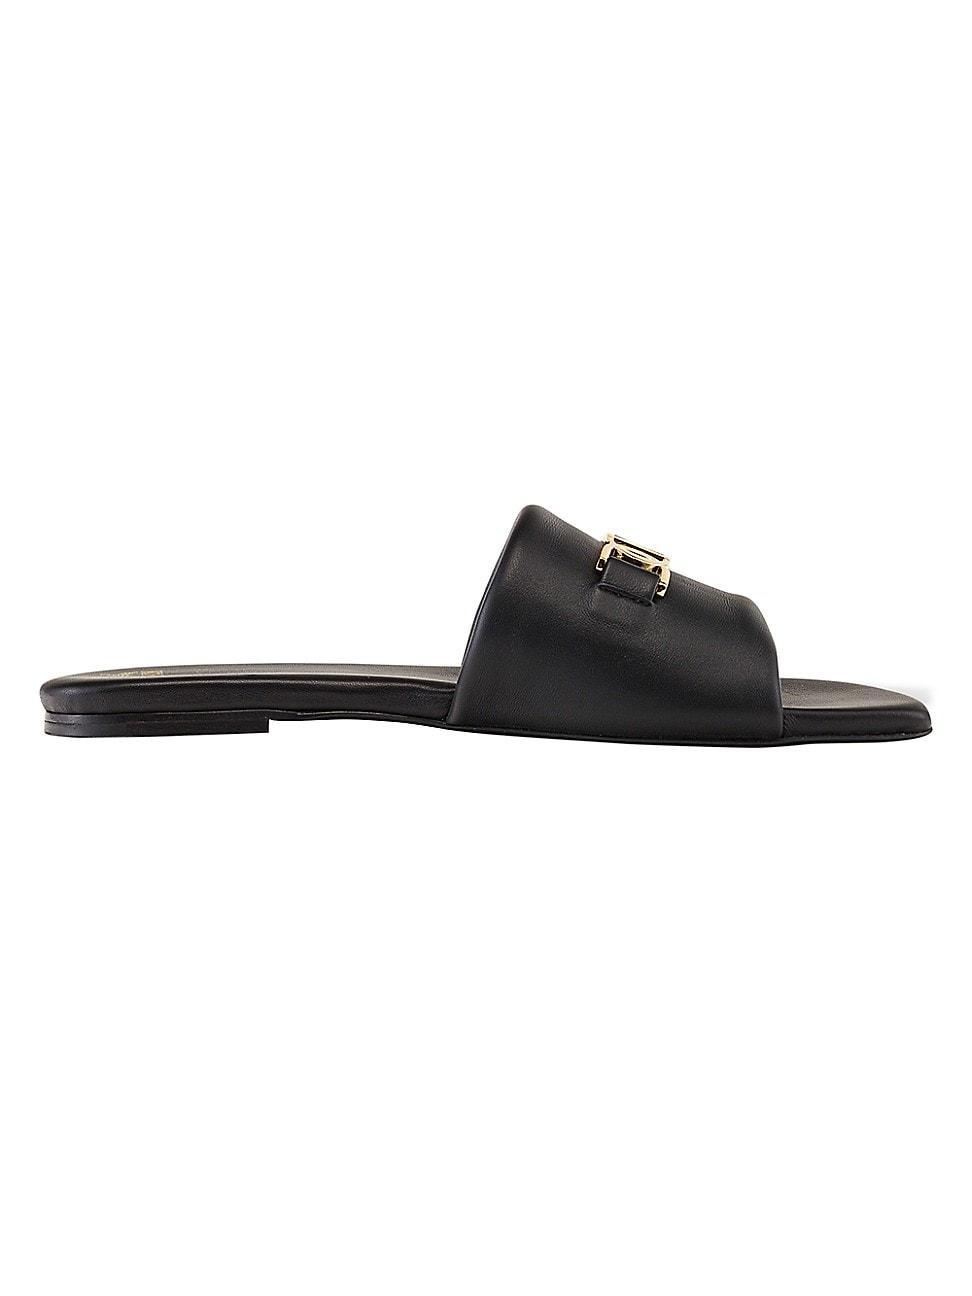 Womens Mode Travia Leather Slides Product Image